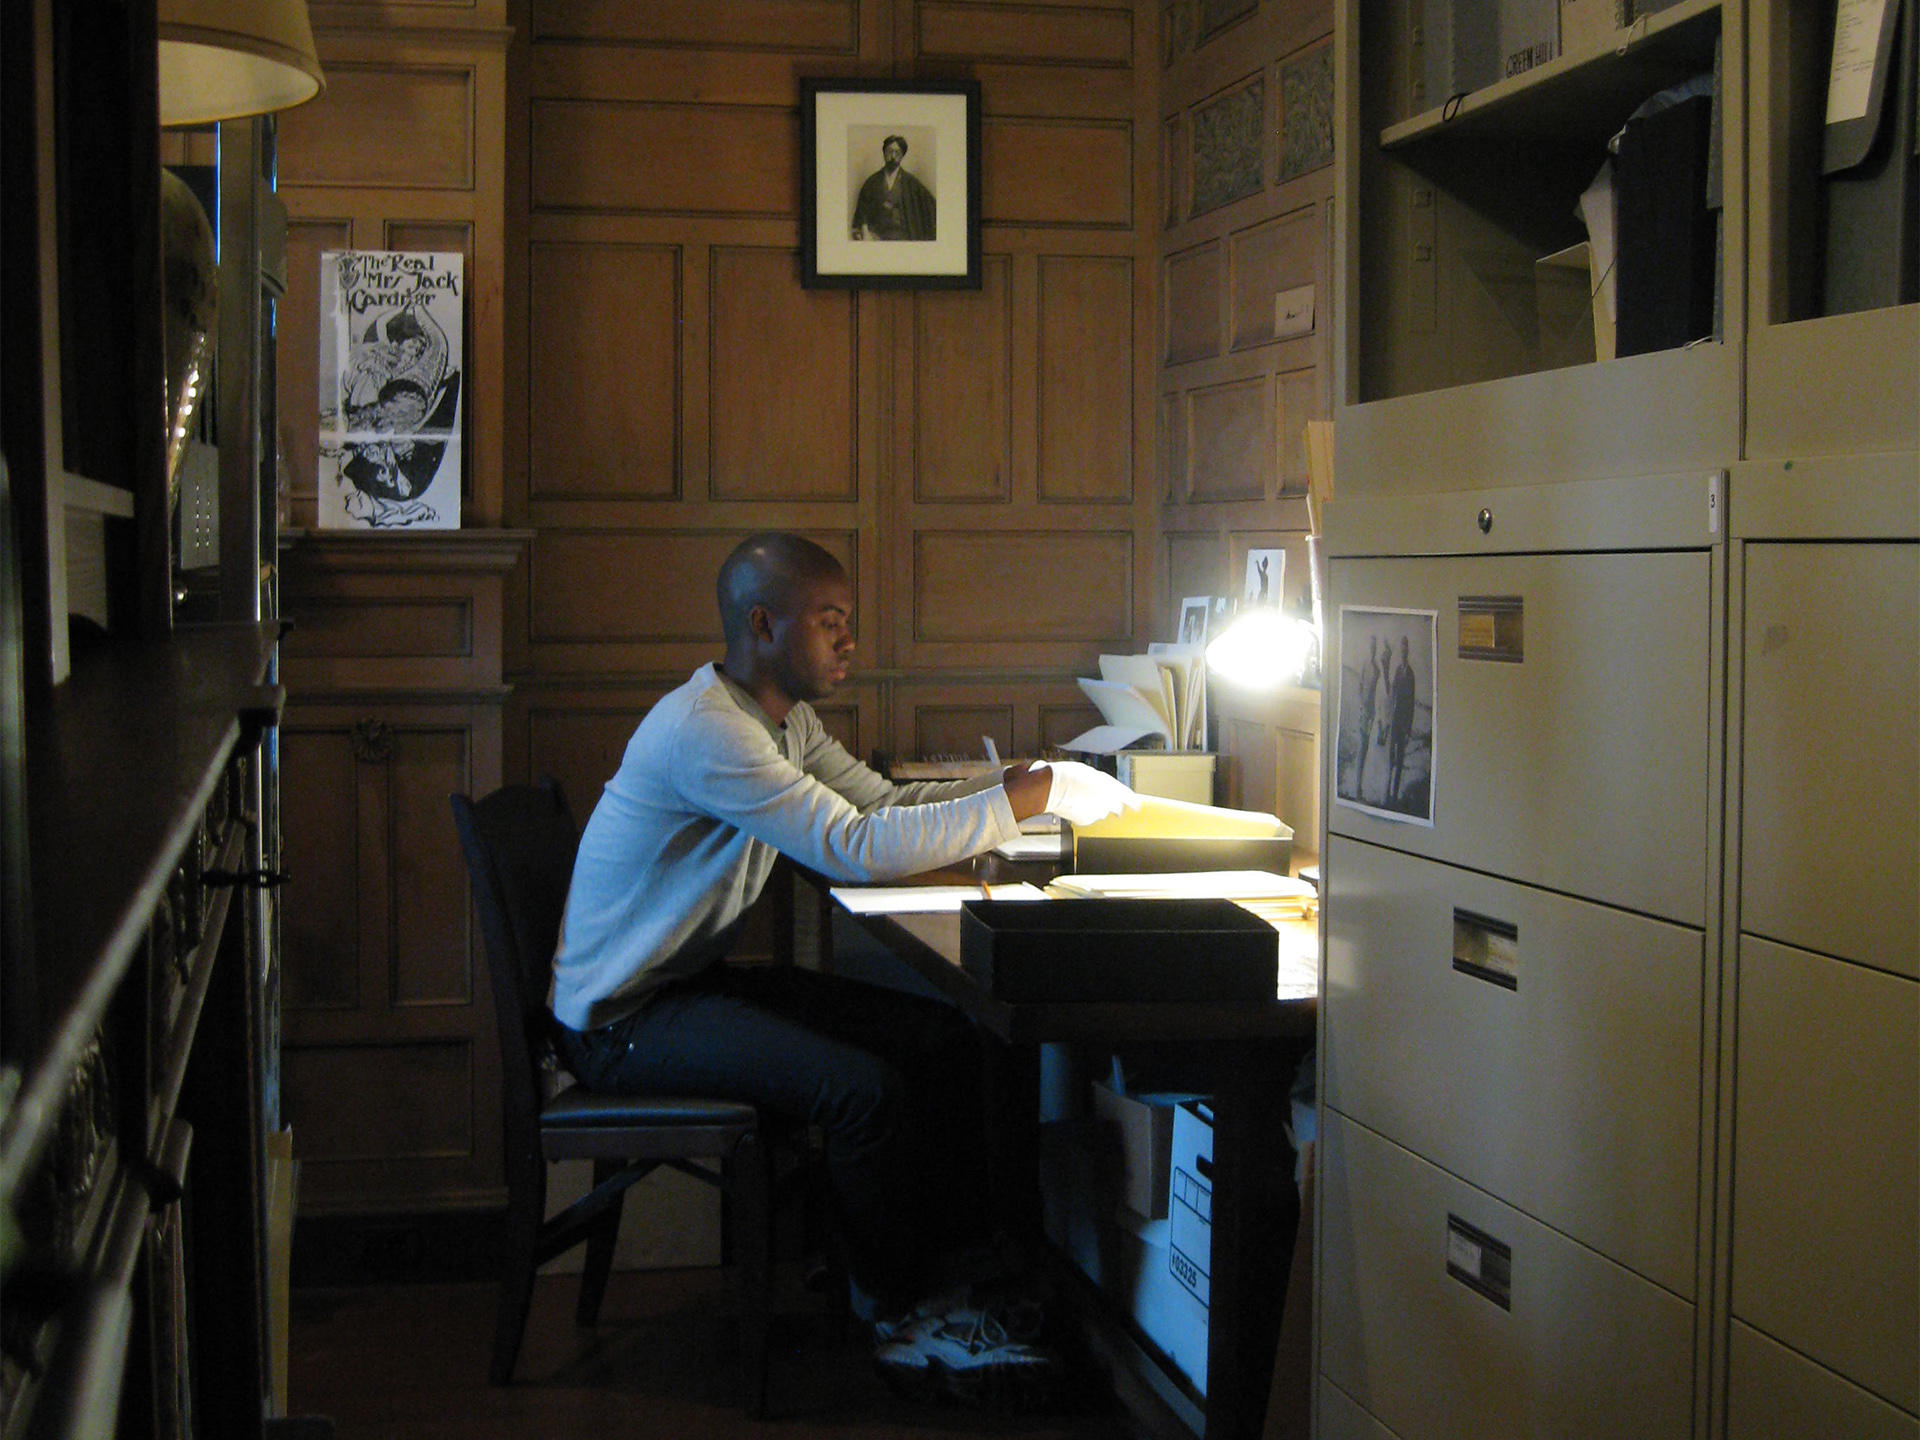 Adam Pendleton working in the archives, 2008